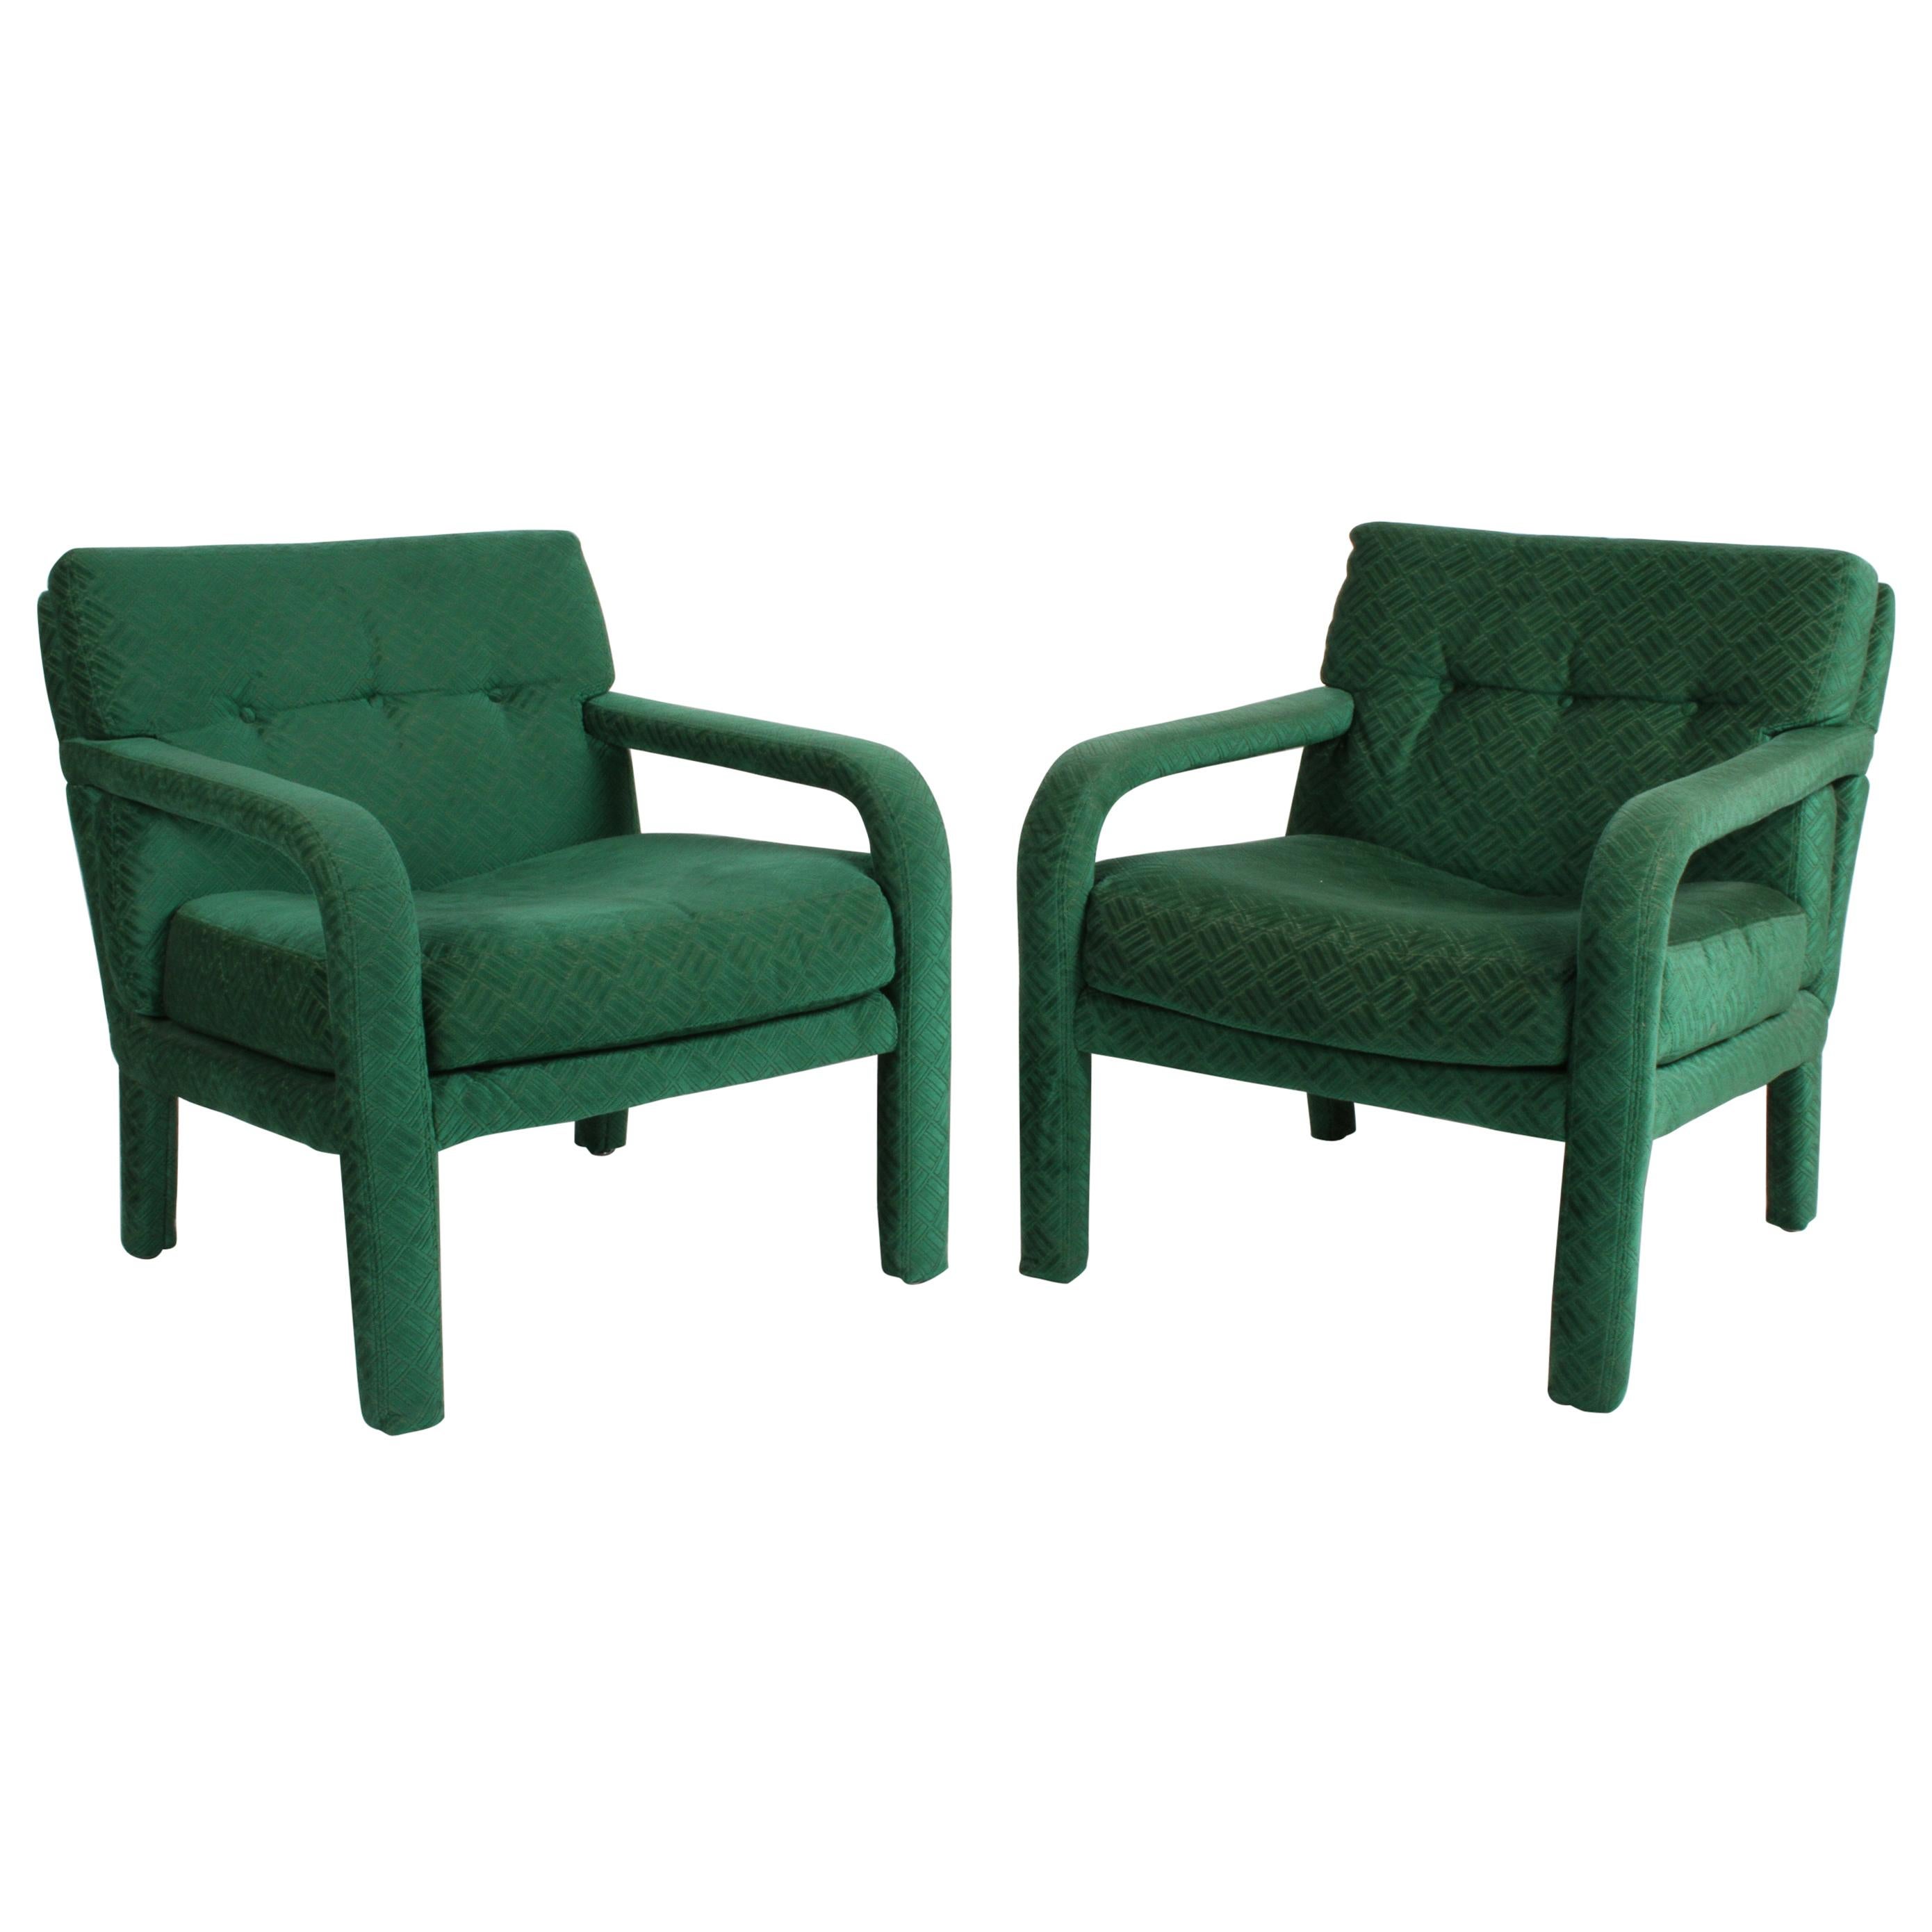 Pair of 1970s Directional Lounge Chairs in a Textured Emerald Green Upholstery